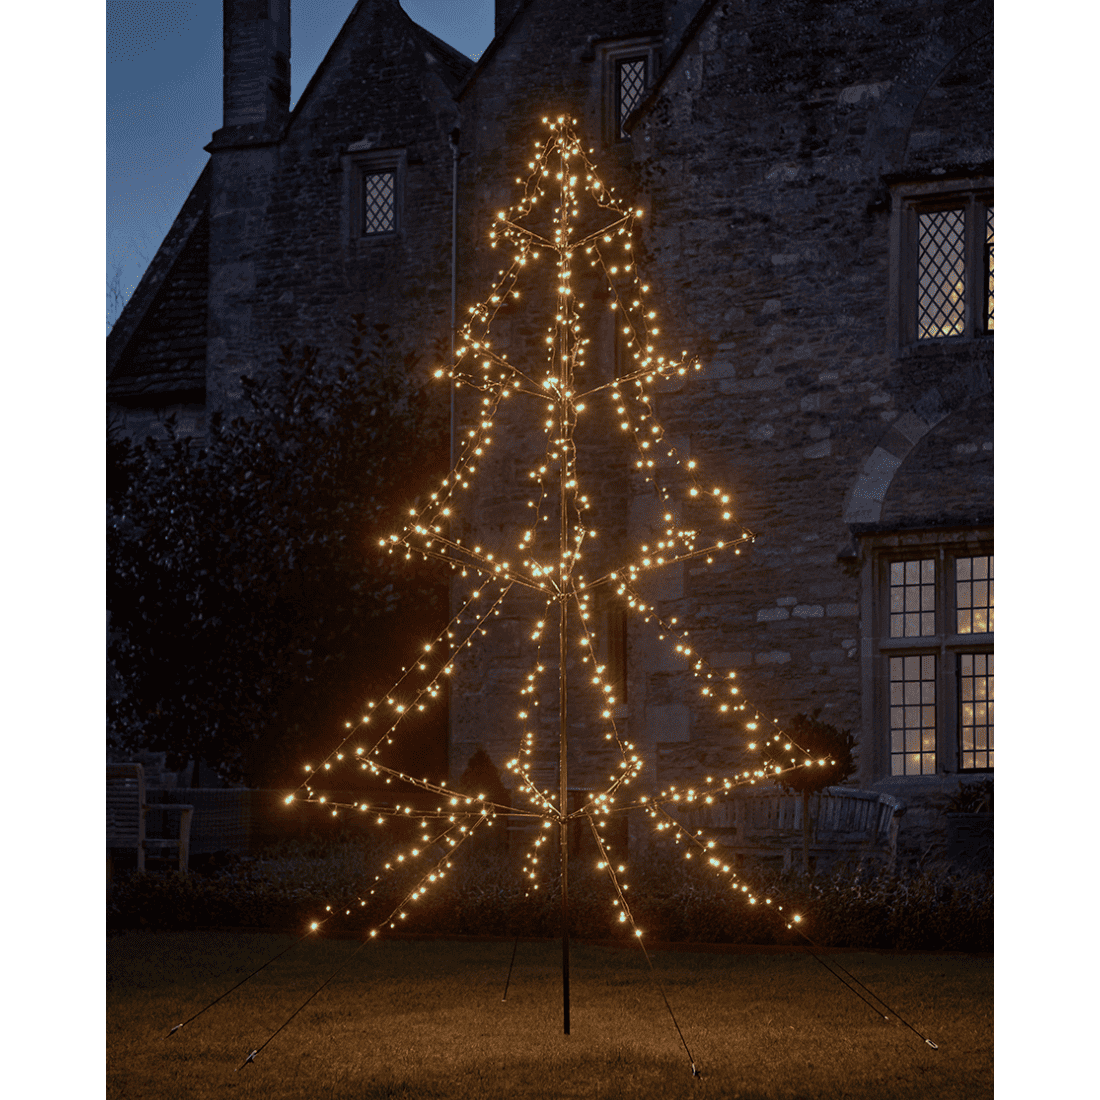 Indoor Outdoor Light Up Tree - The Festive Farm Shed